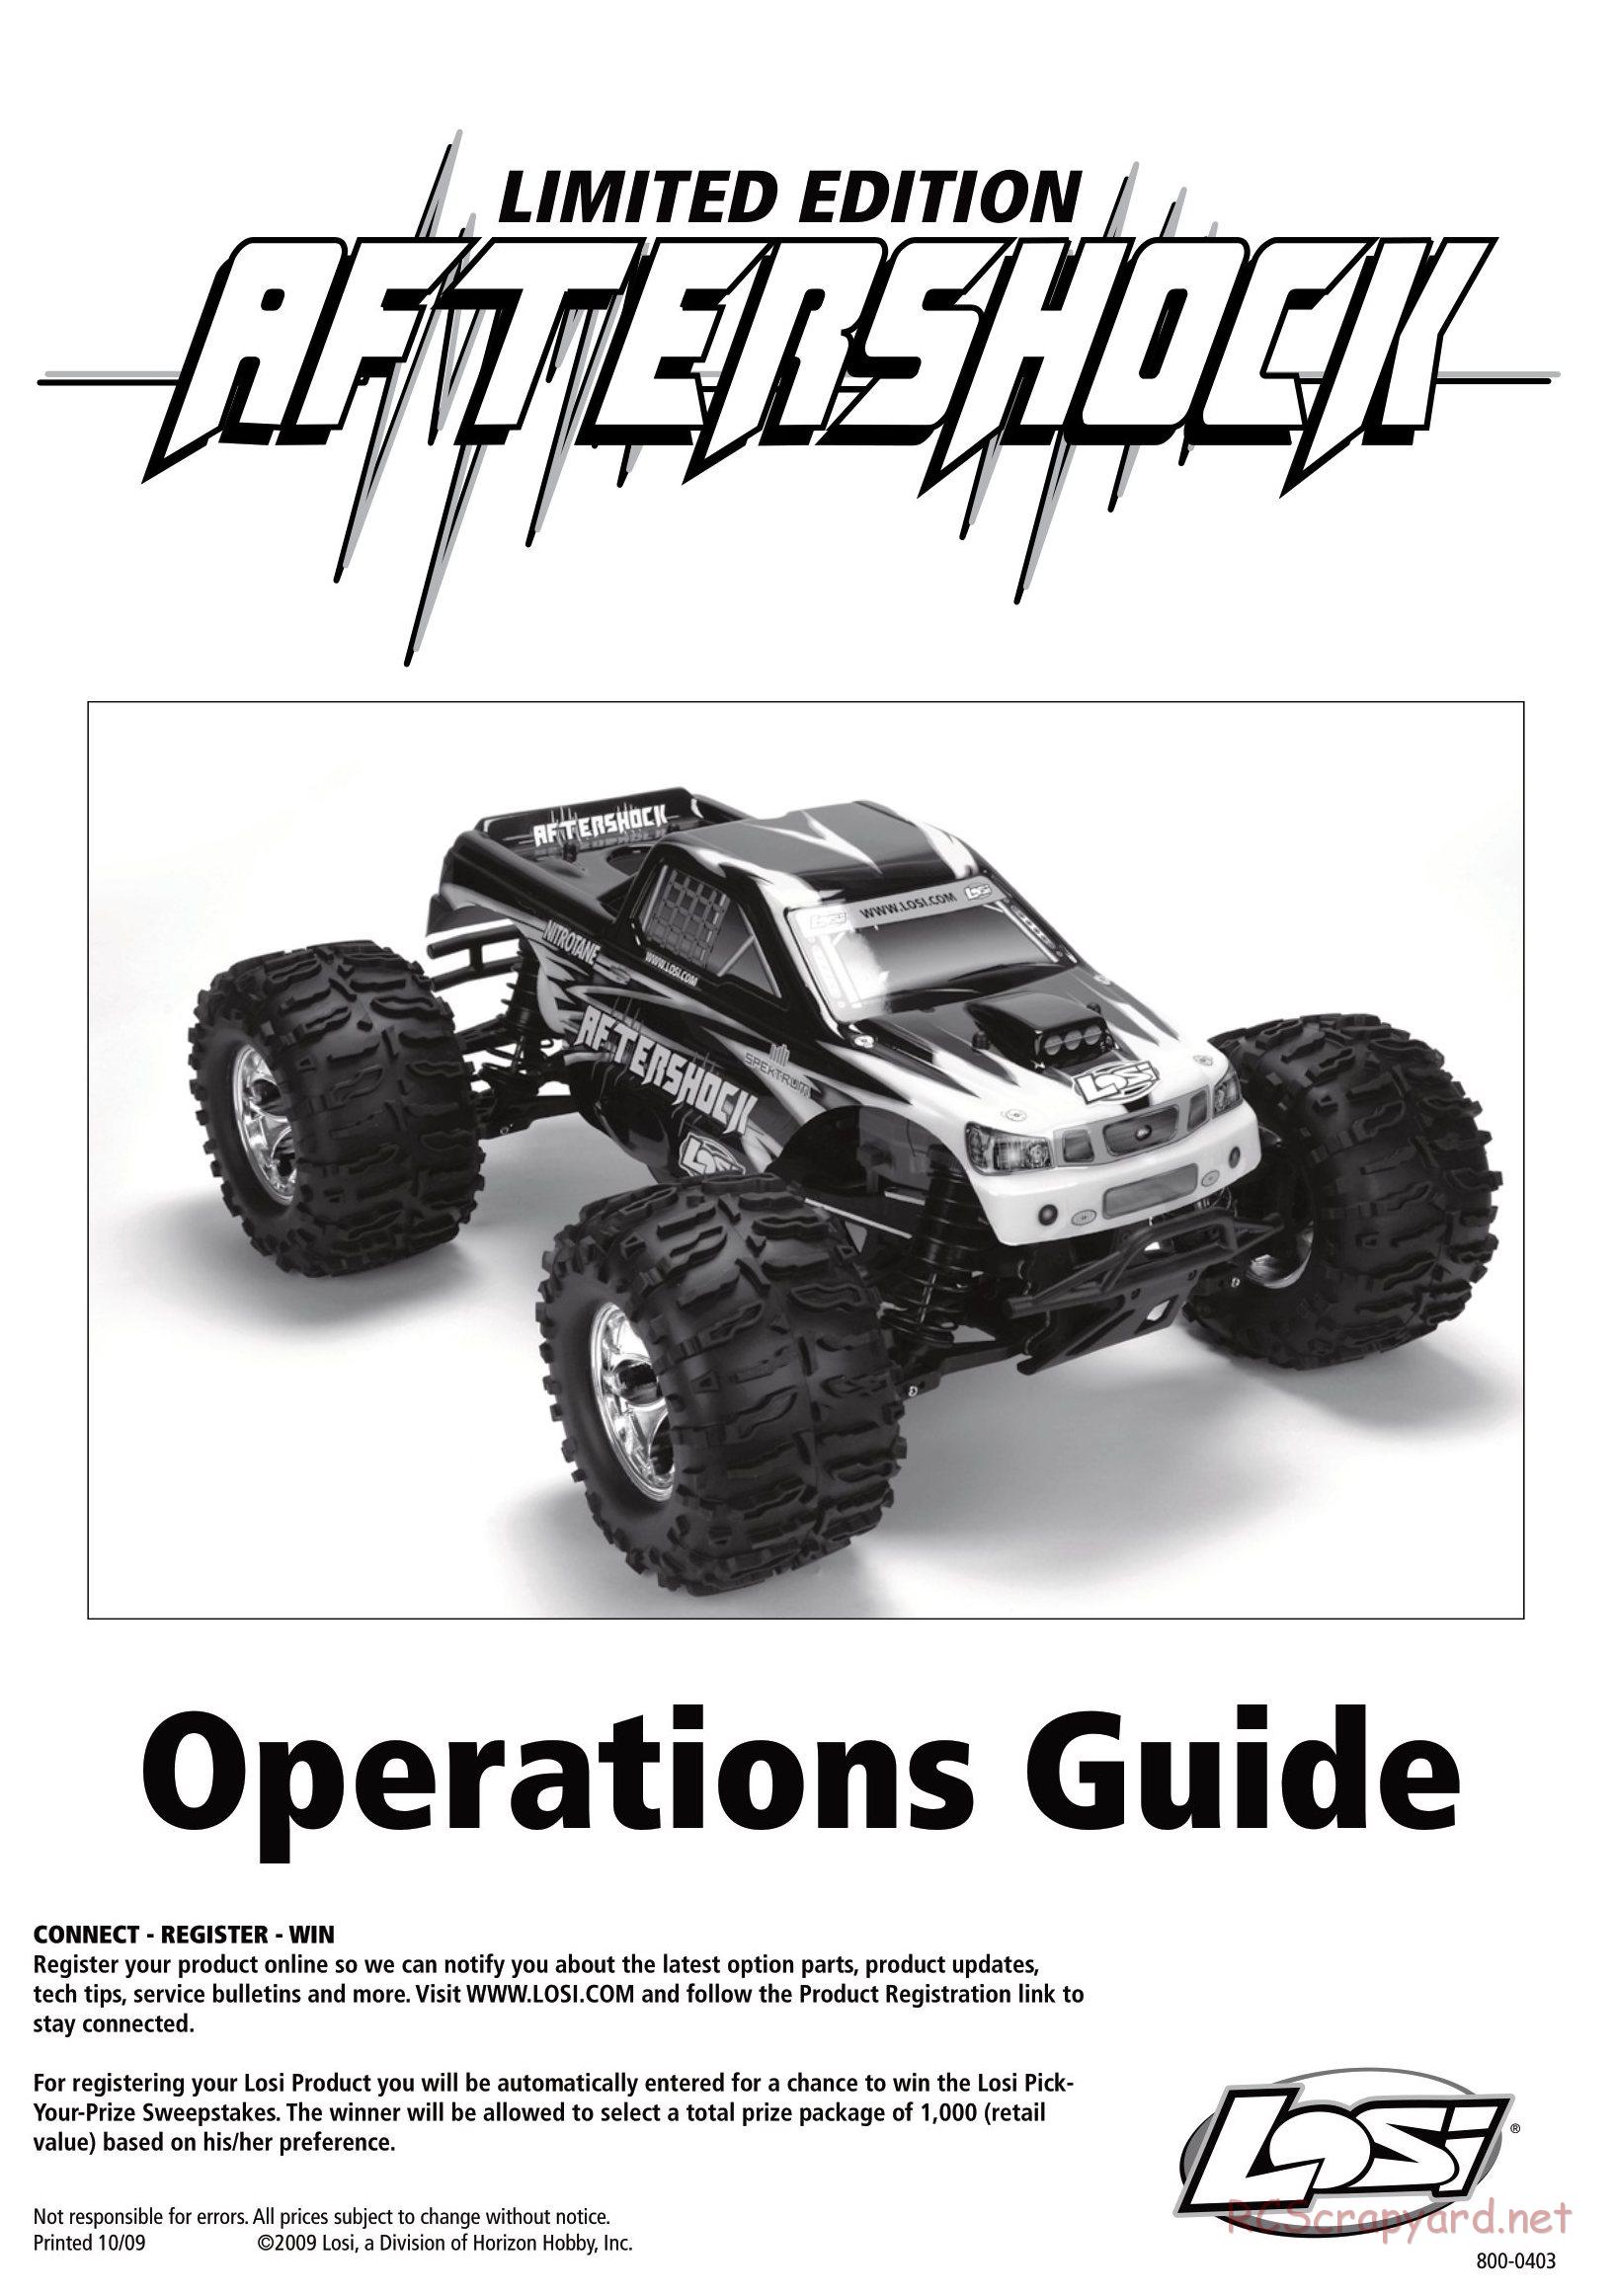 Team Losi - Limited Edition Aftershock - Manual - Page 1